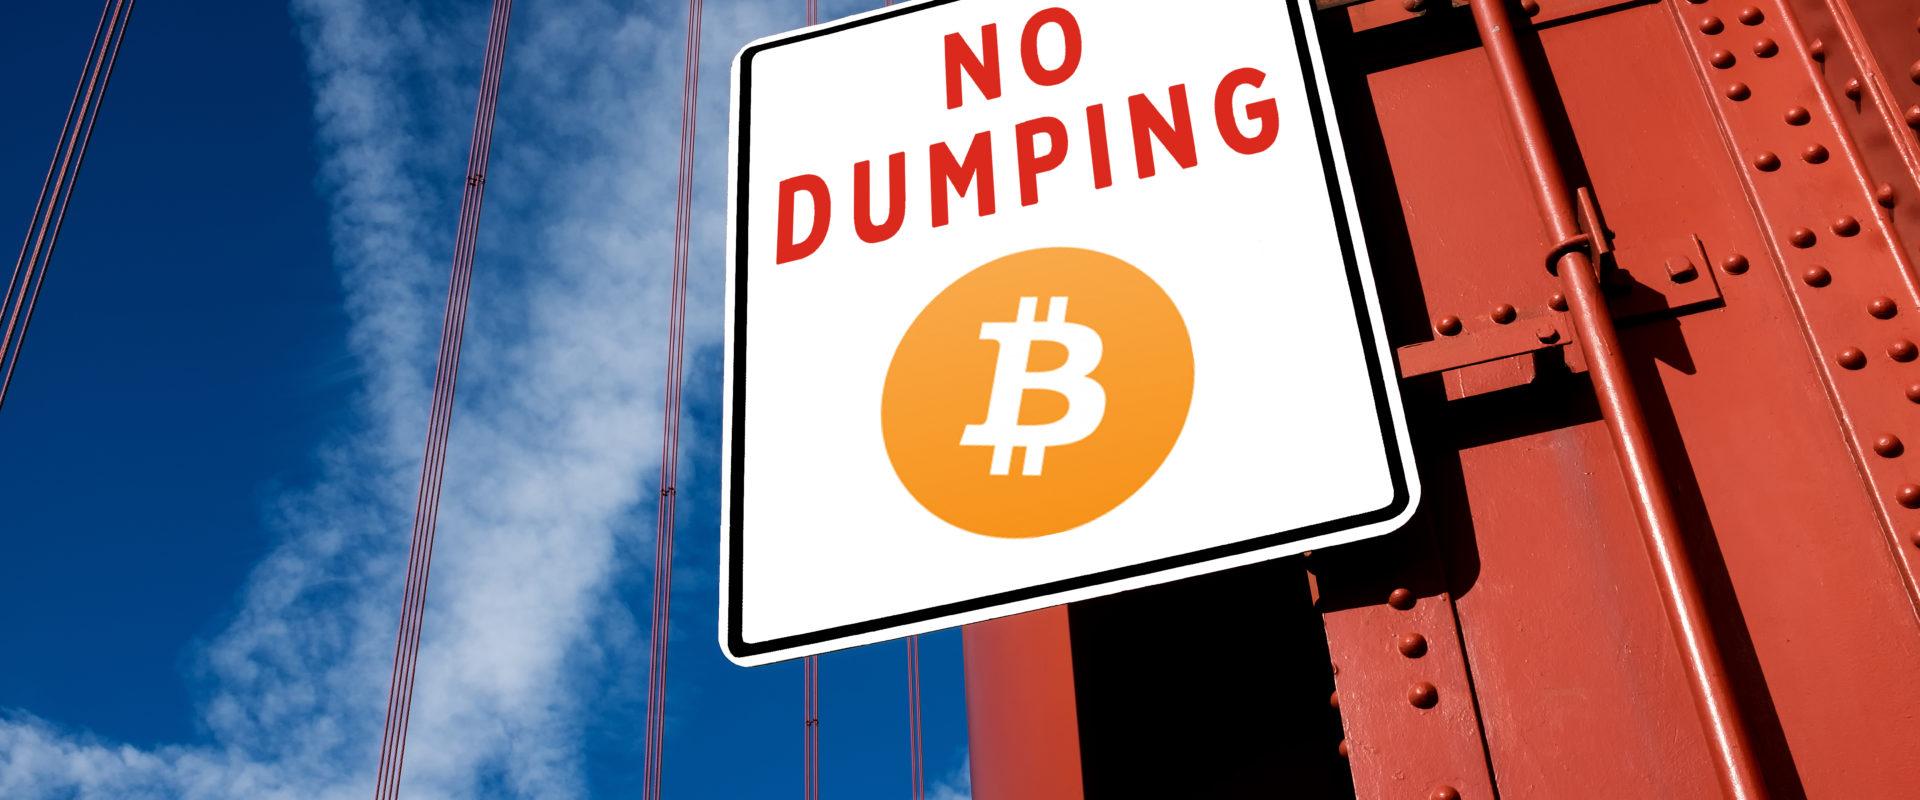 Bitcoin Falls, Down in The doldrums after plummeting to $5,568